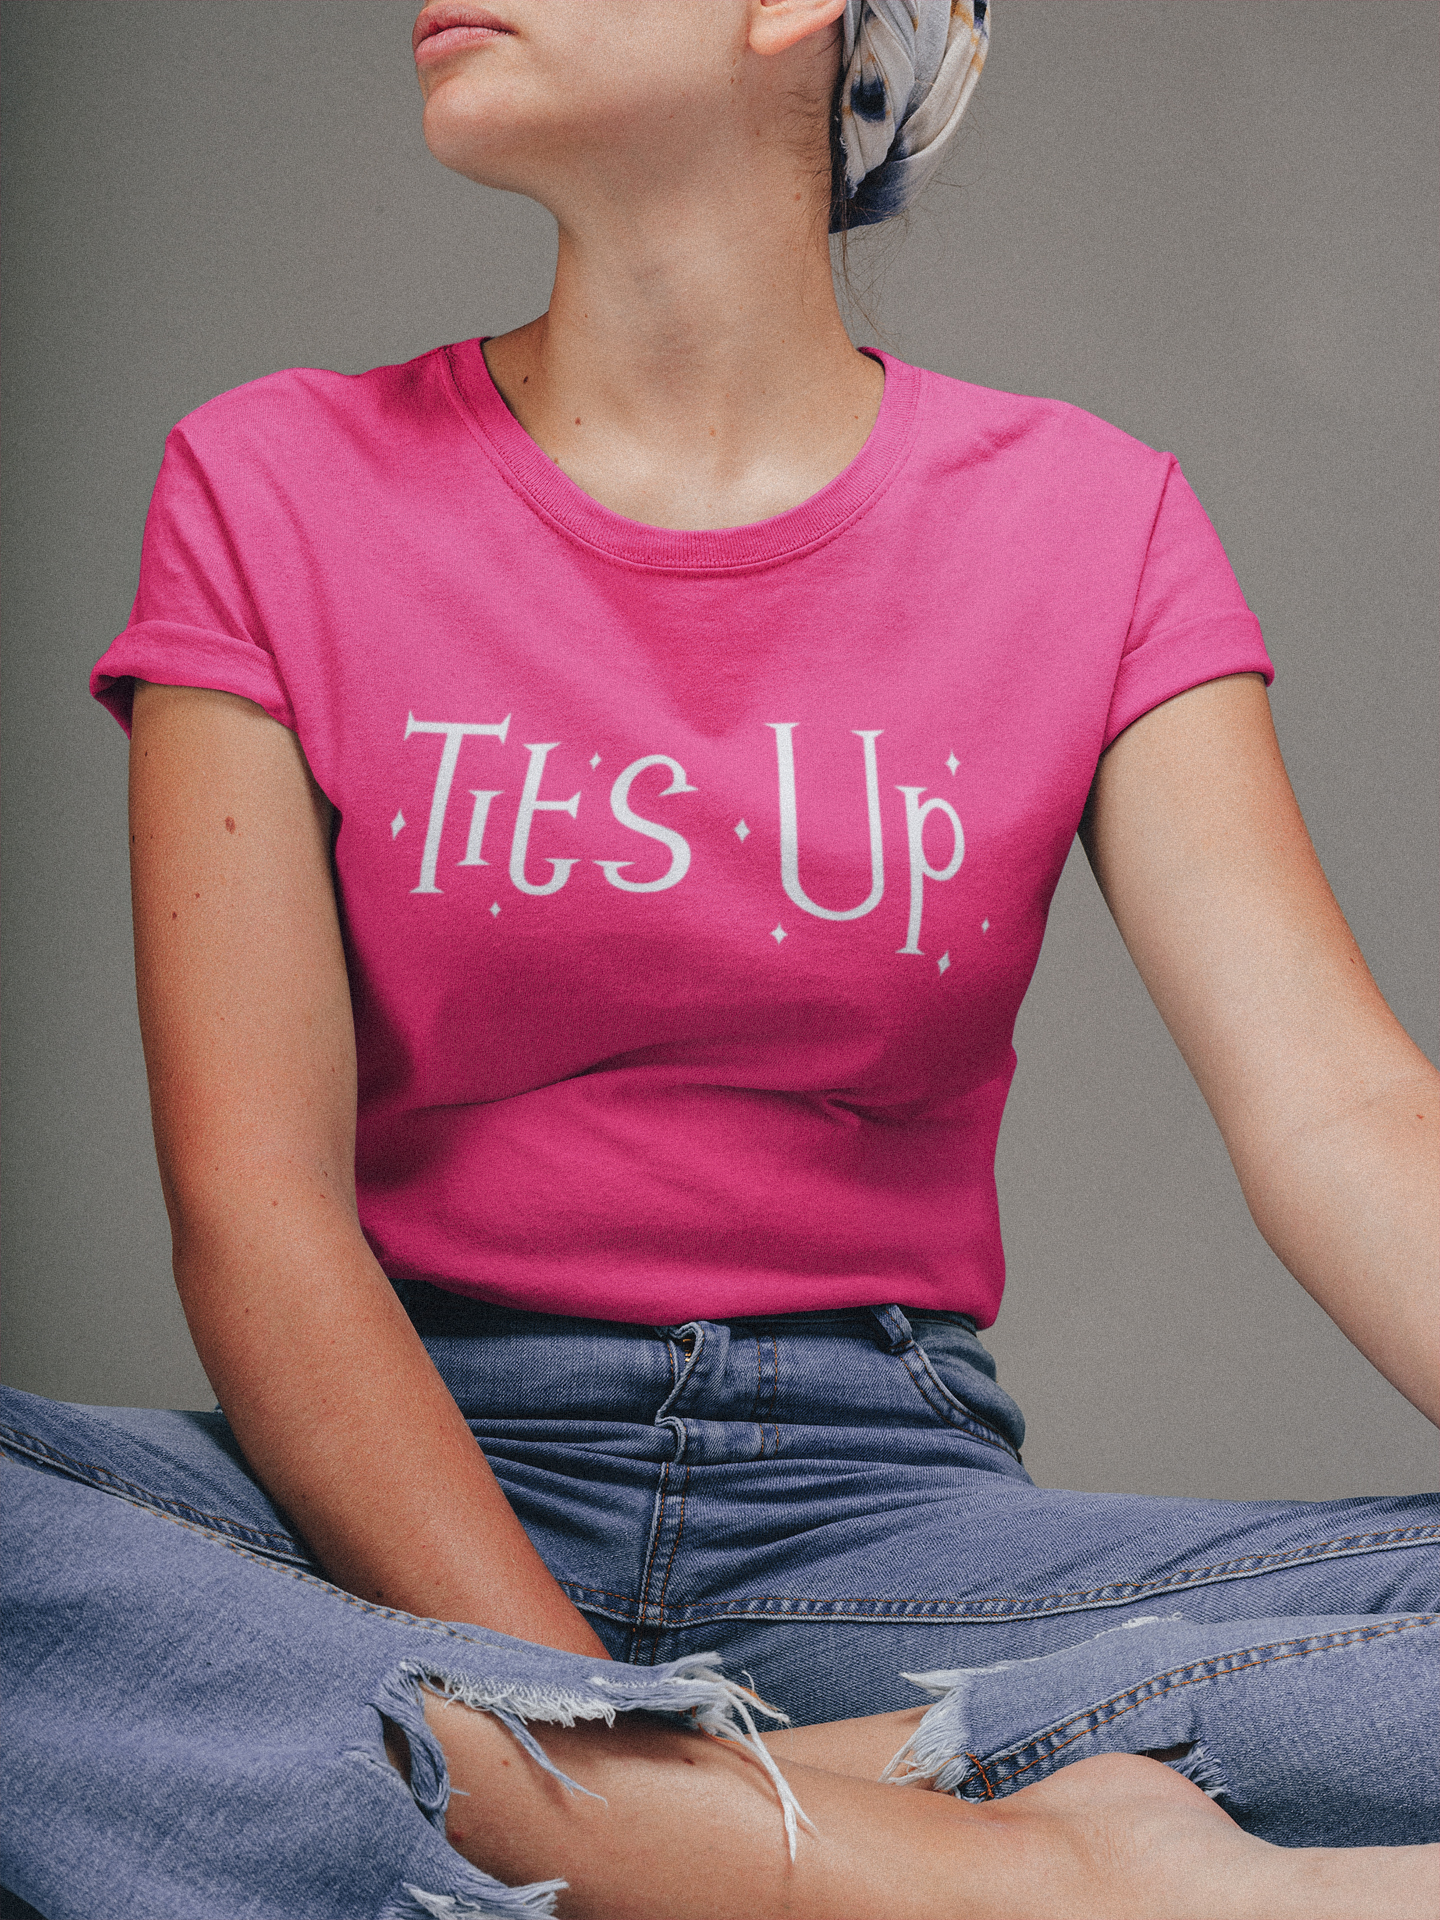 Tits Up T-Shirt - The Marvelous Mrs Maisel Inspired T-Shirt - Mrs Maisel Tits Up T-Shirt - Tits Up Mrs Maisel Inspired T-Shirt